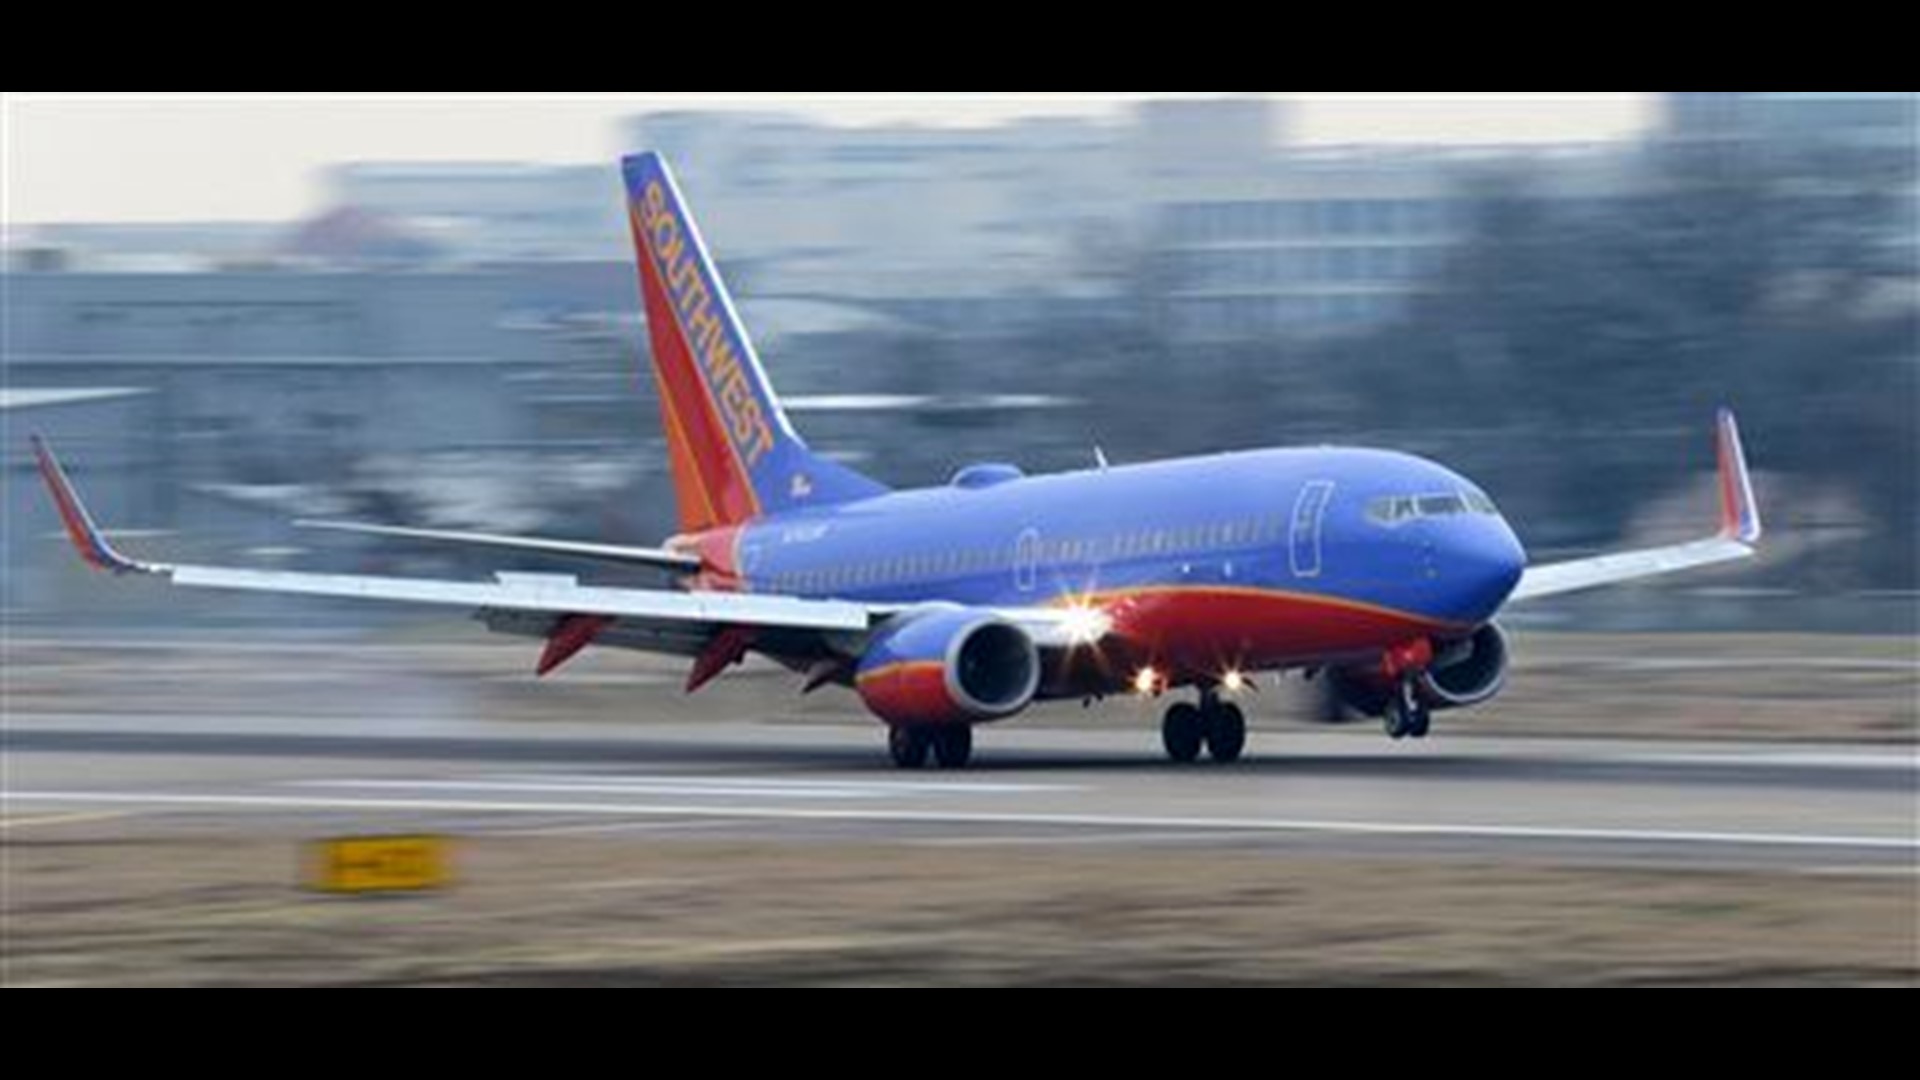 Southwest operations appear on track after day of delays | cbs8.com